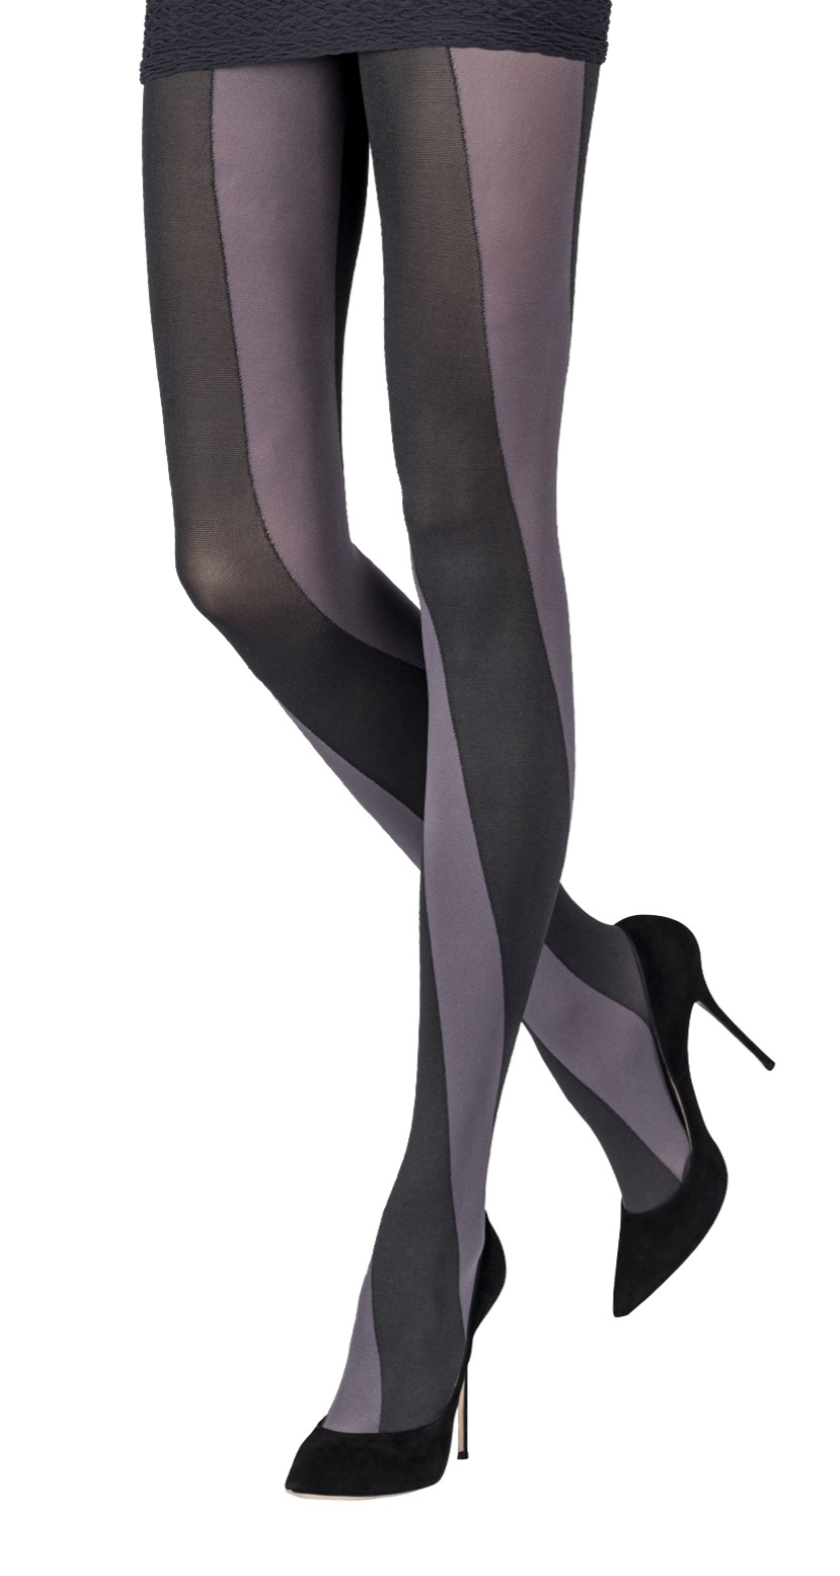 Emilio Cavallini Double Spiral Tights - Ultra opaque fashion tights with a large spiral stripe pattern in black and grey.